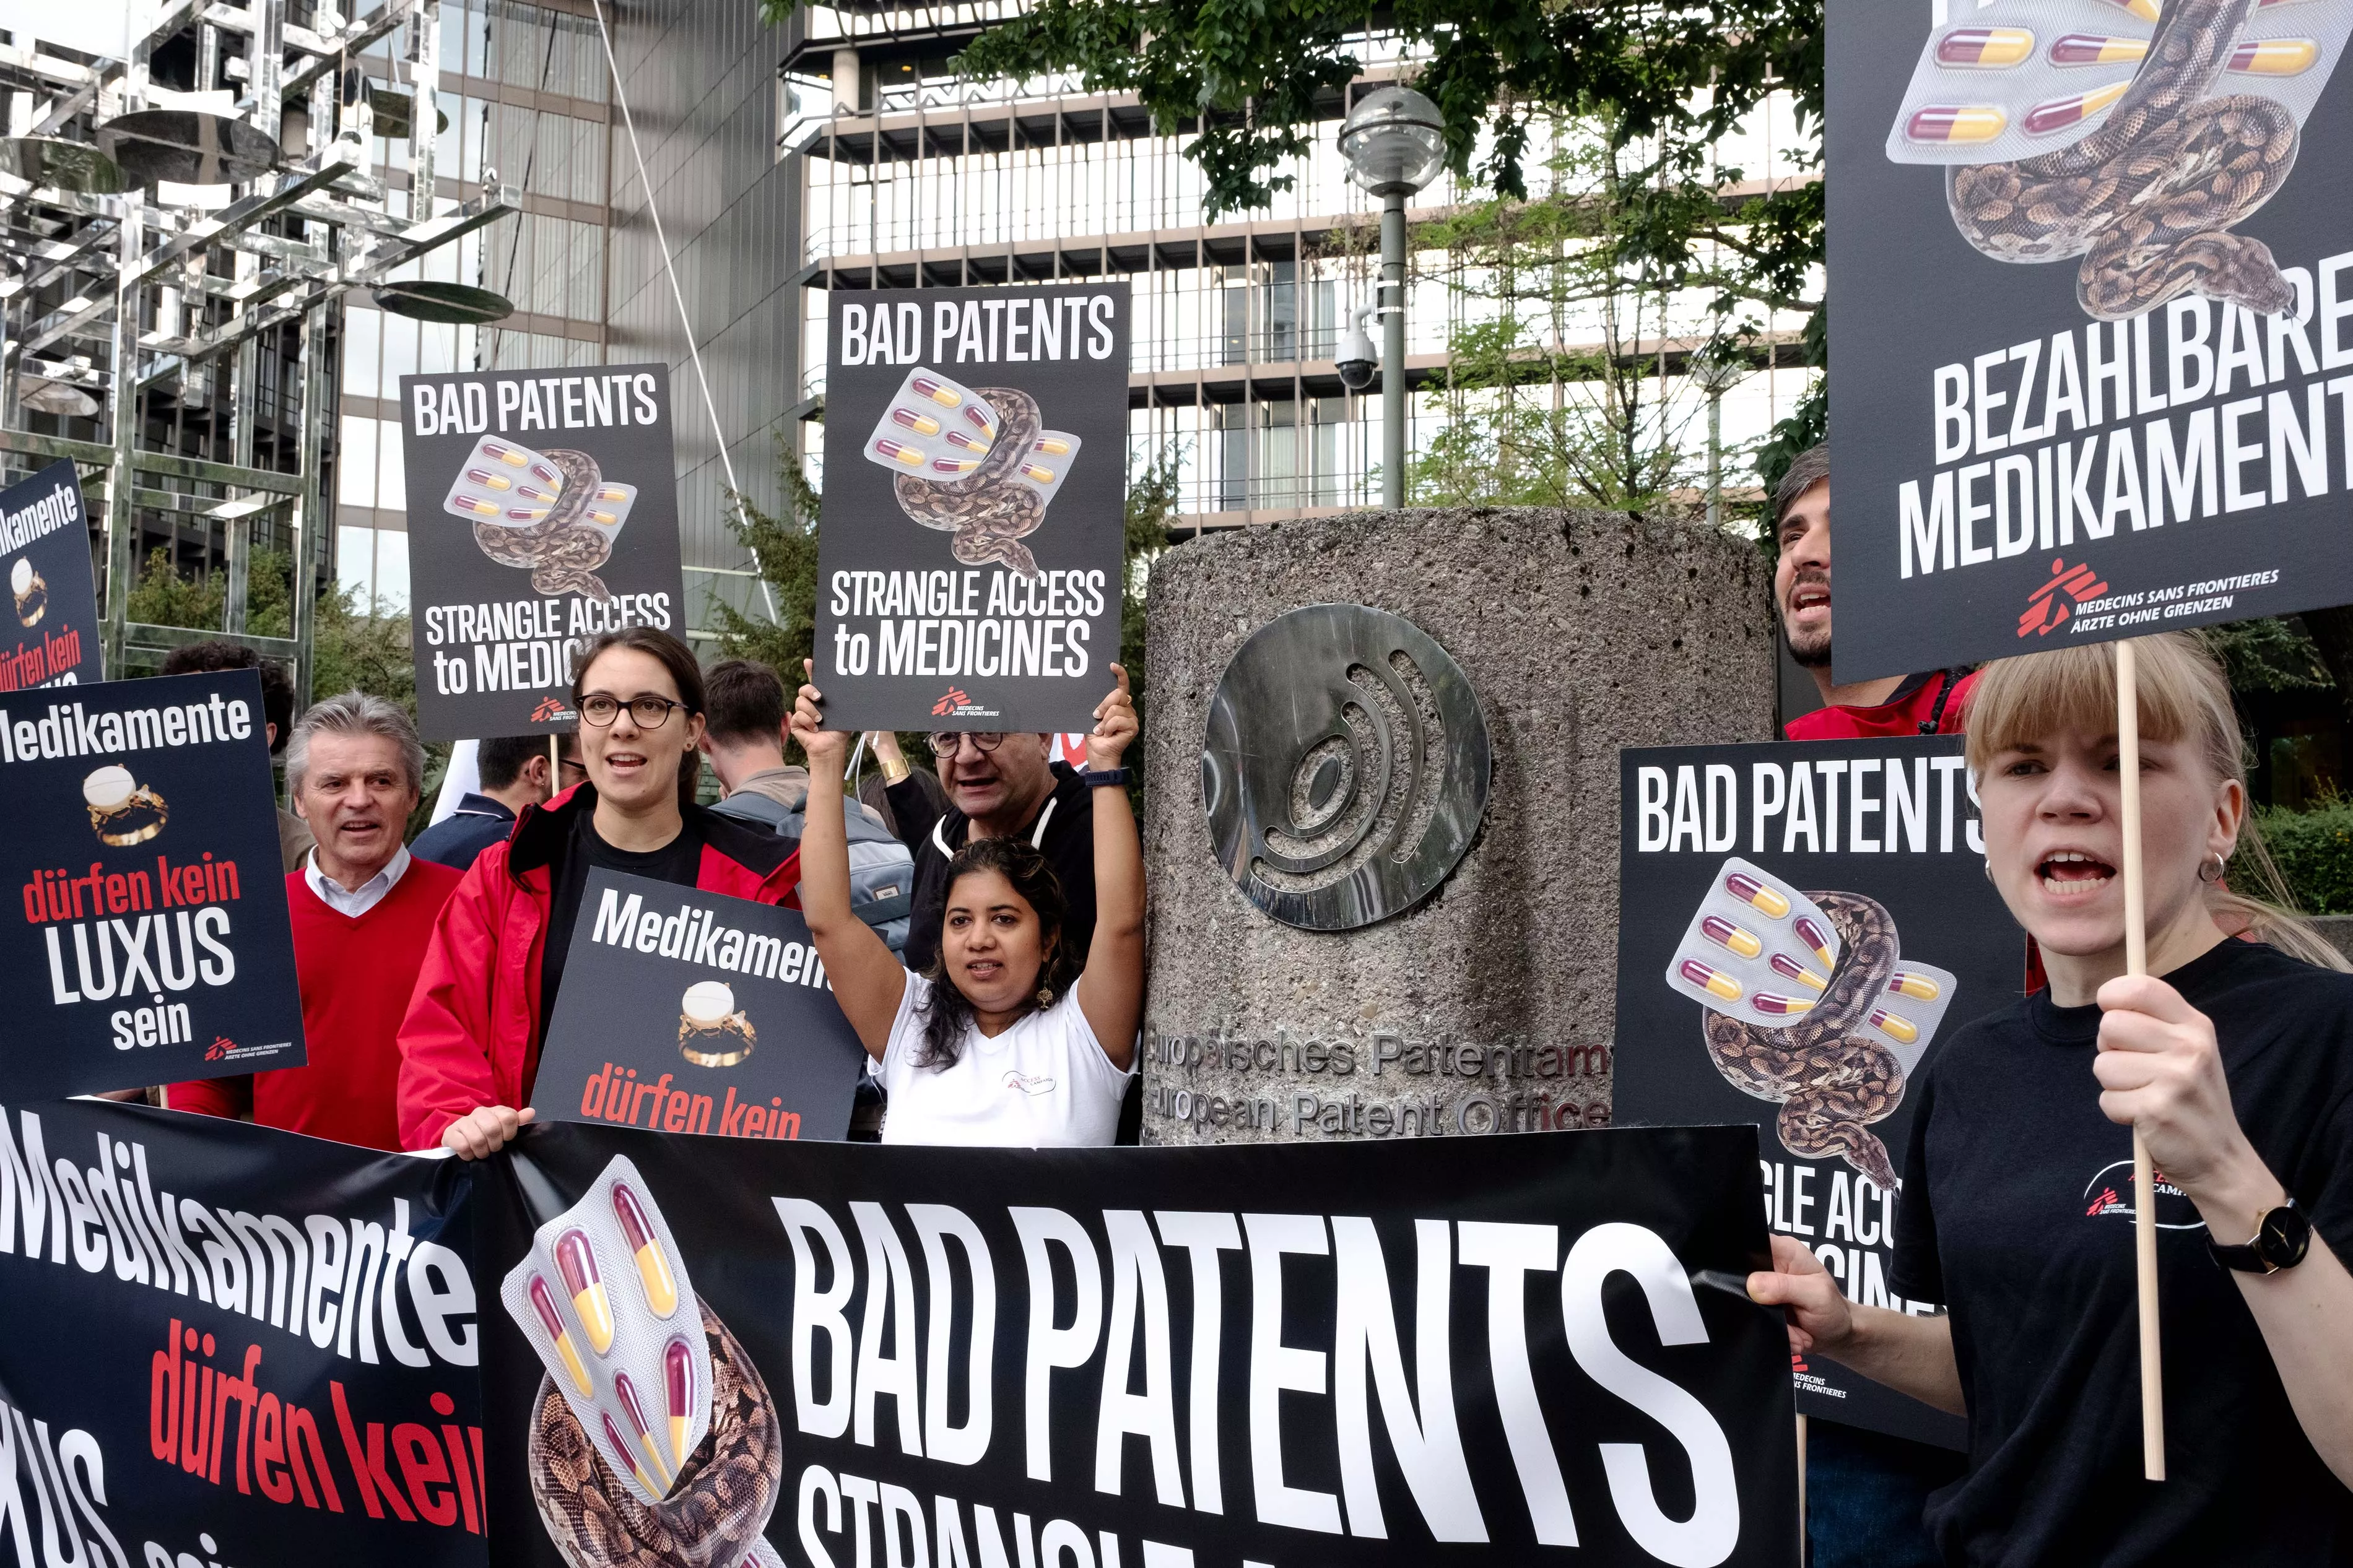 In March 2017, organisations from 17 European countries filed an opposition to Gilead Science's patent on the highly effective hepatitis C drug sofosbuvir. On 13th and 14th of September 2018, the hearing took e place before the European Patent Office in Munich.  Activists held a protest in front of the European Patent Office for affordable medicines at the start of proceedings on 13 September.